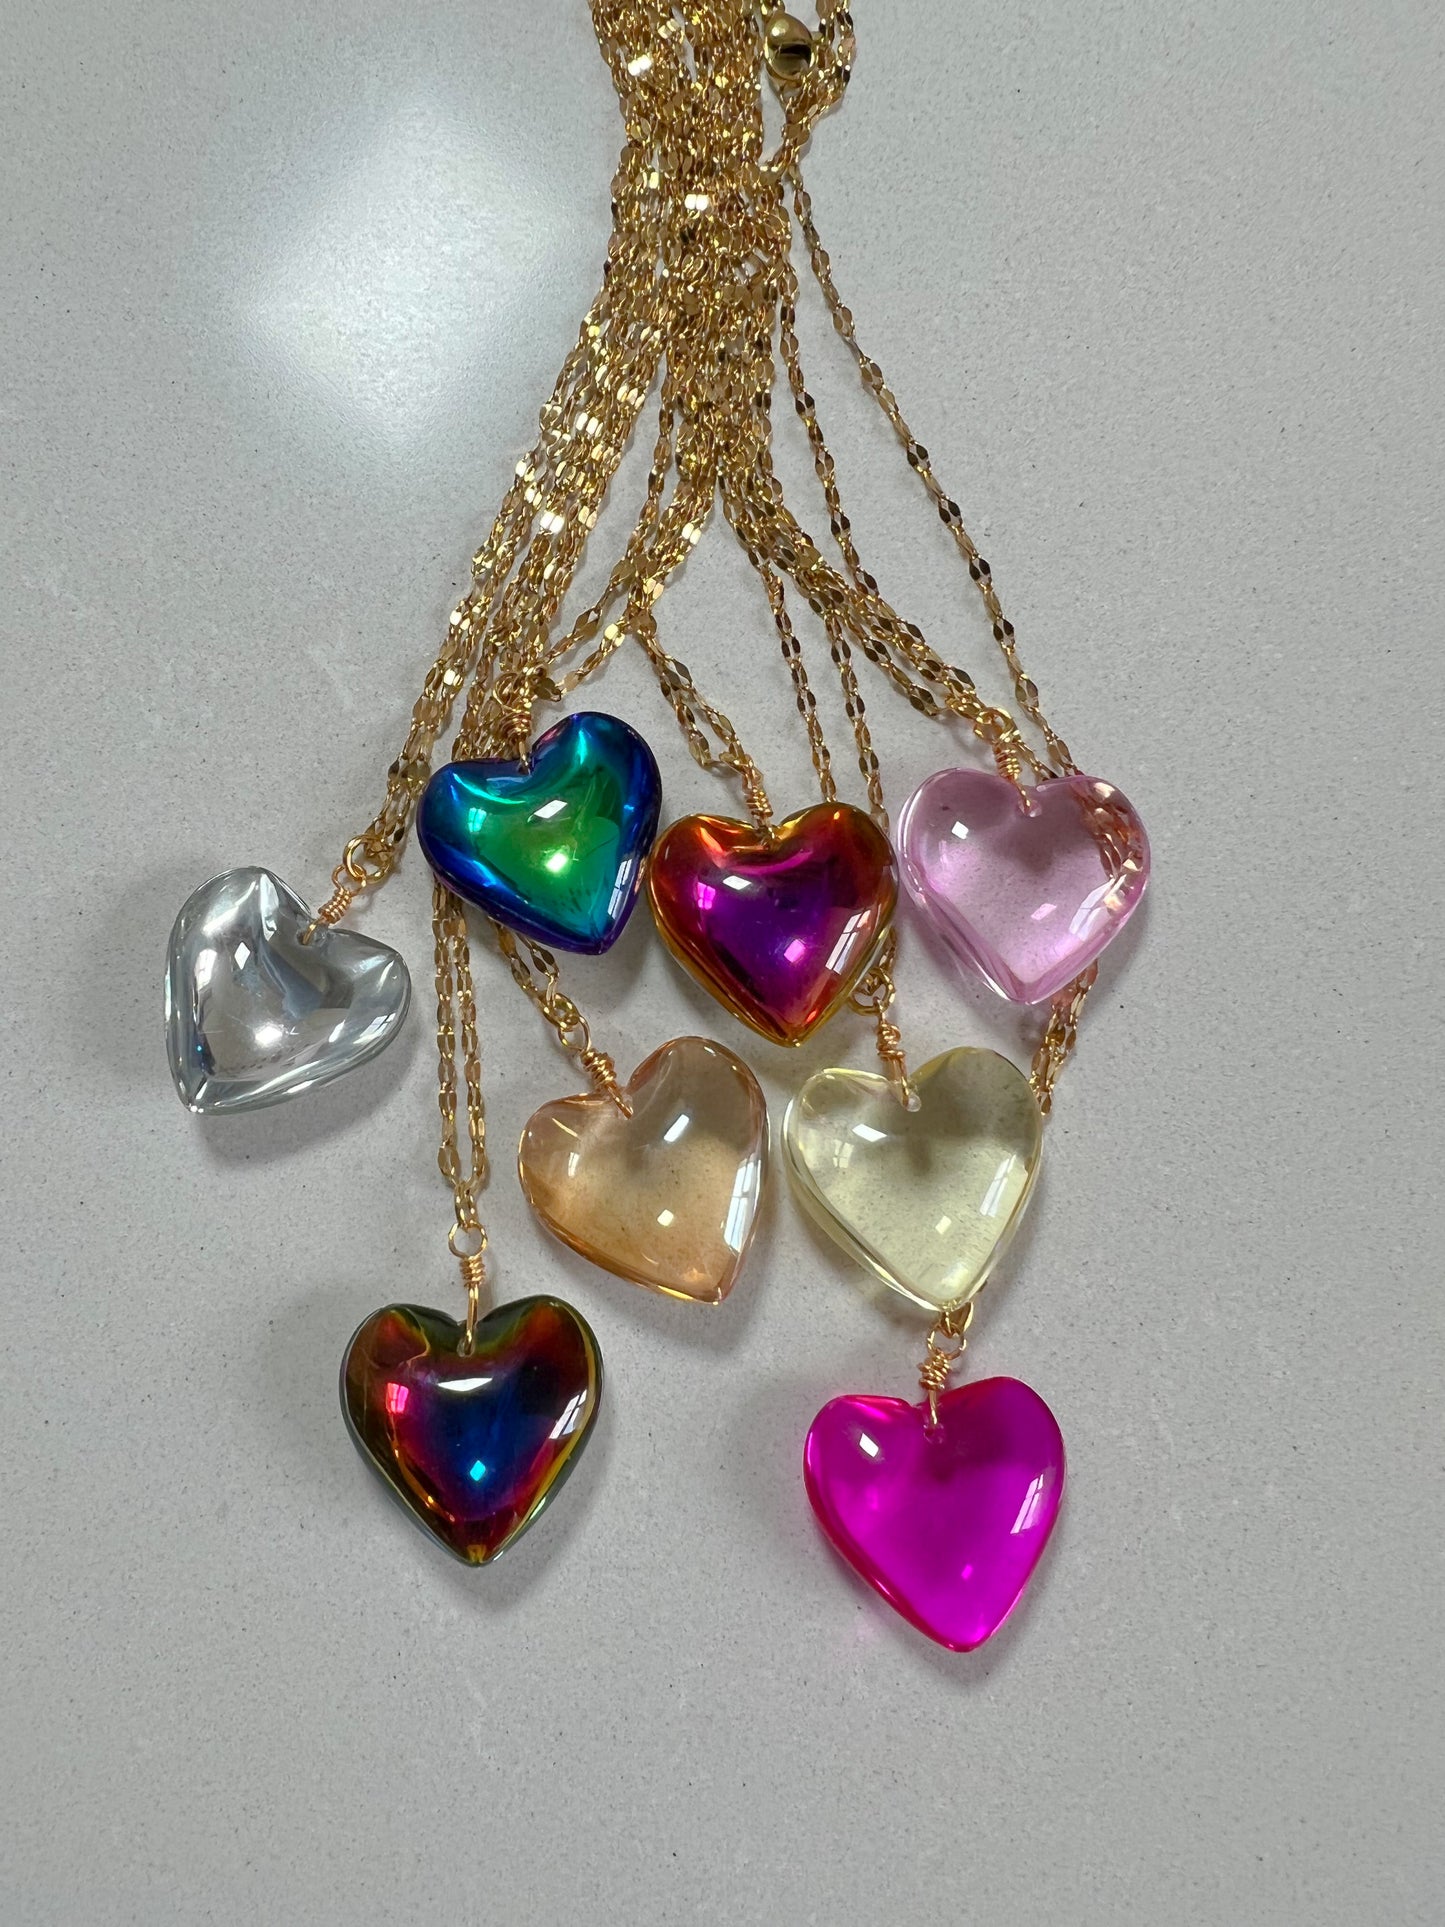 HEART OF GOLD NECKLACE